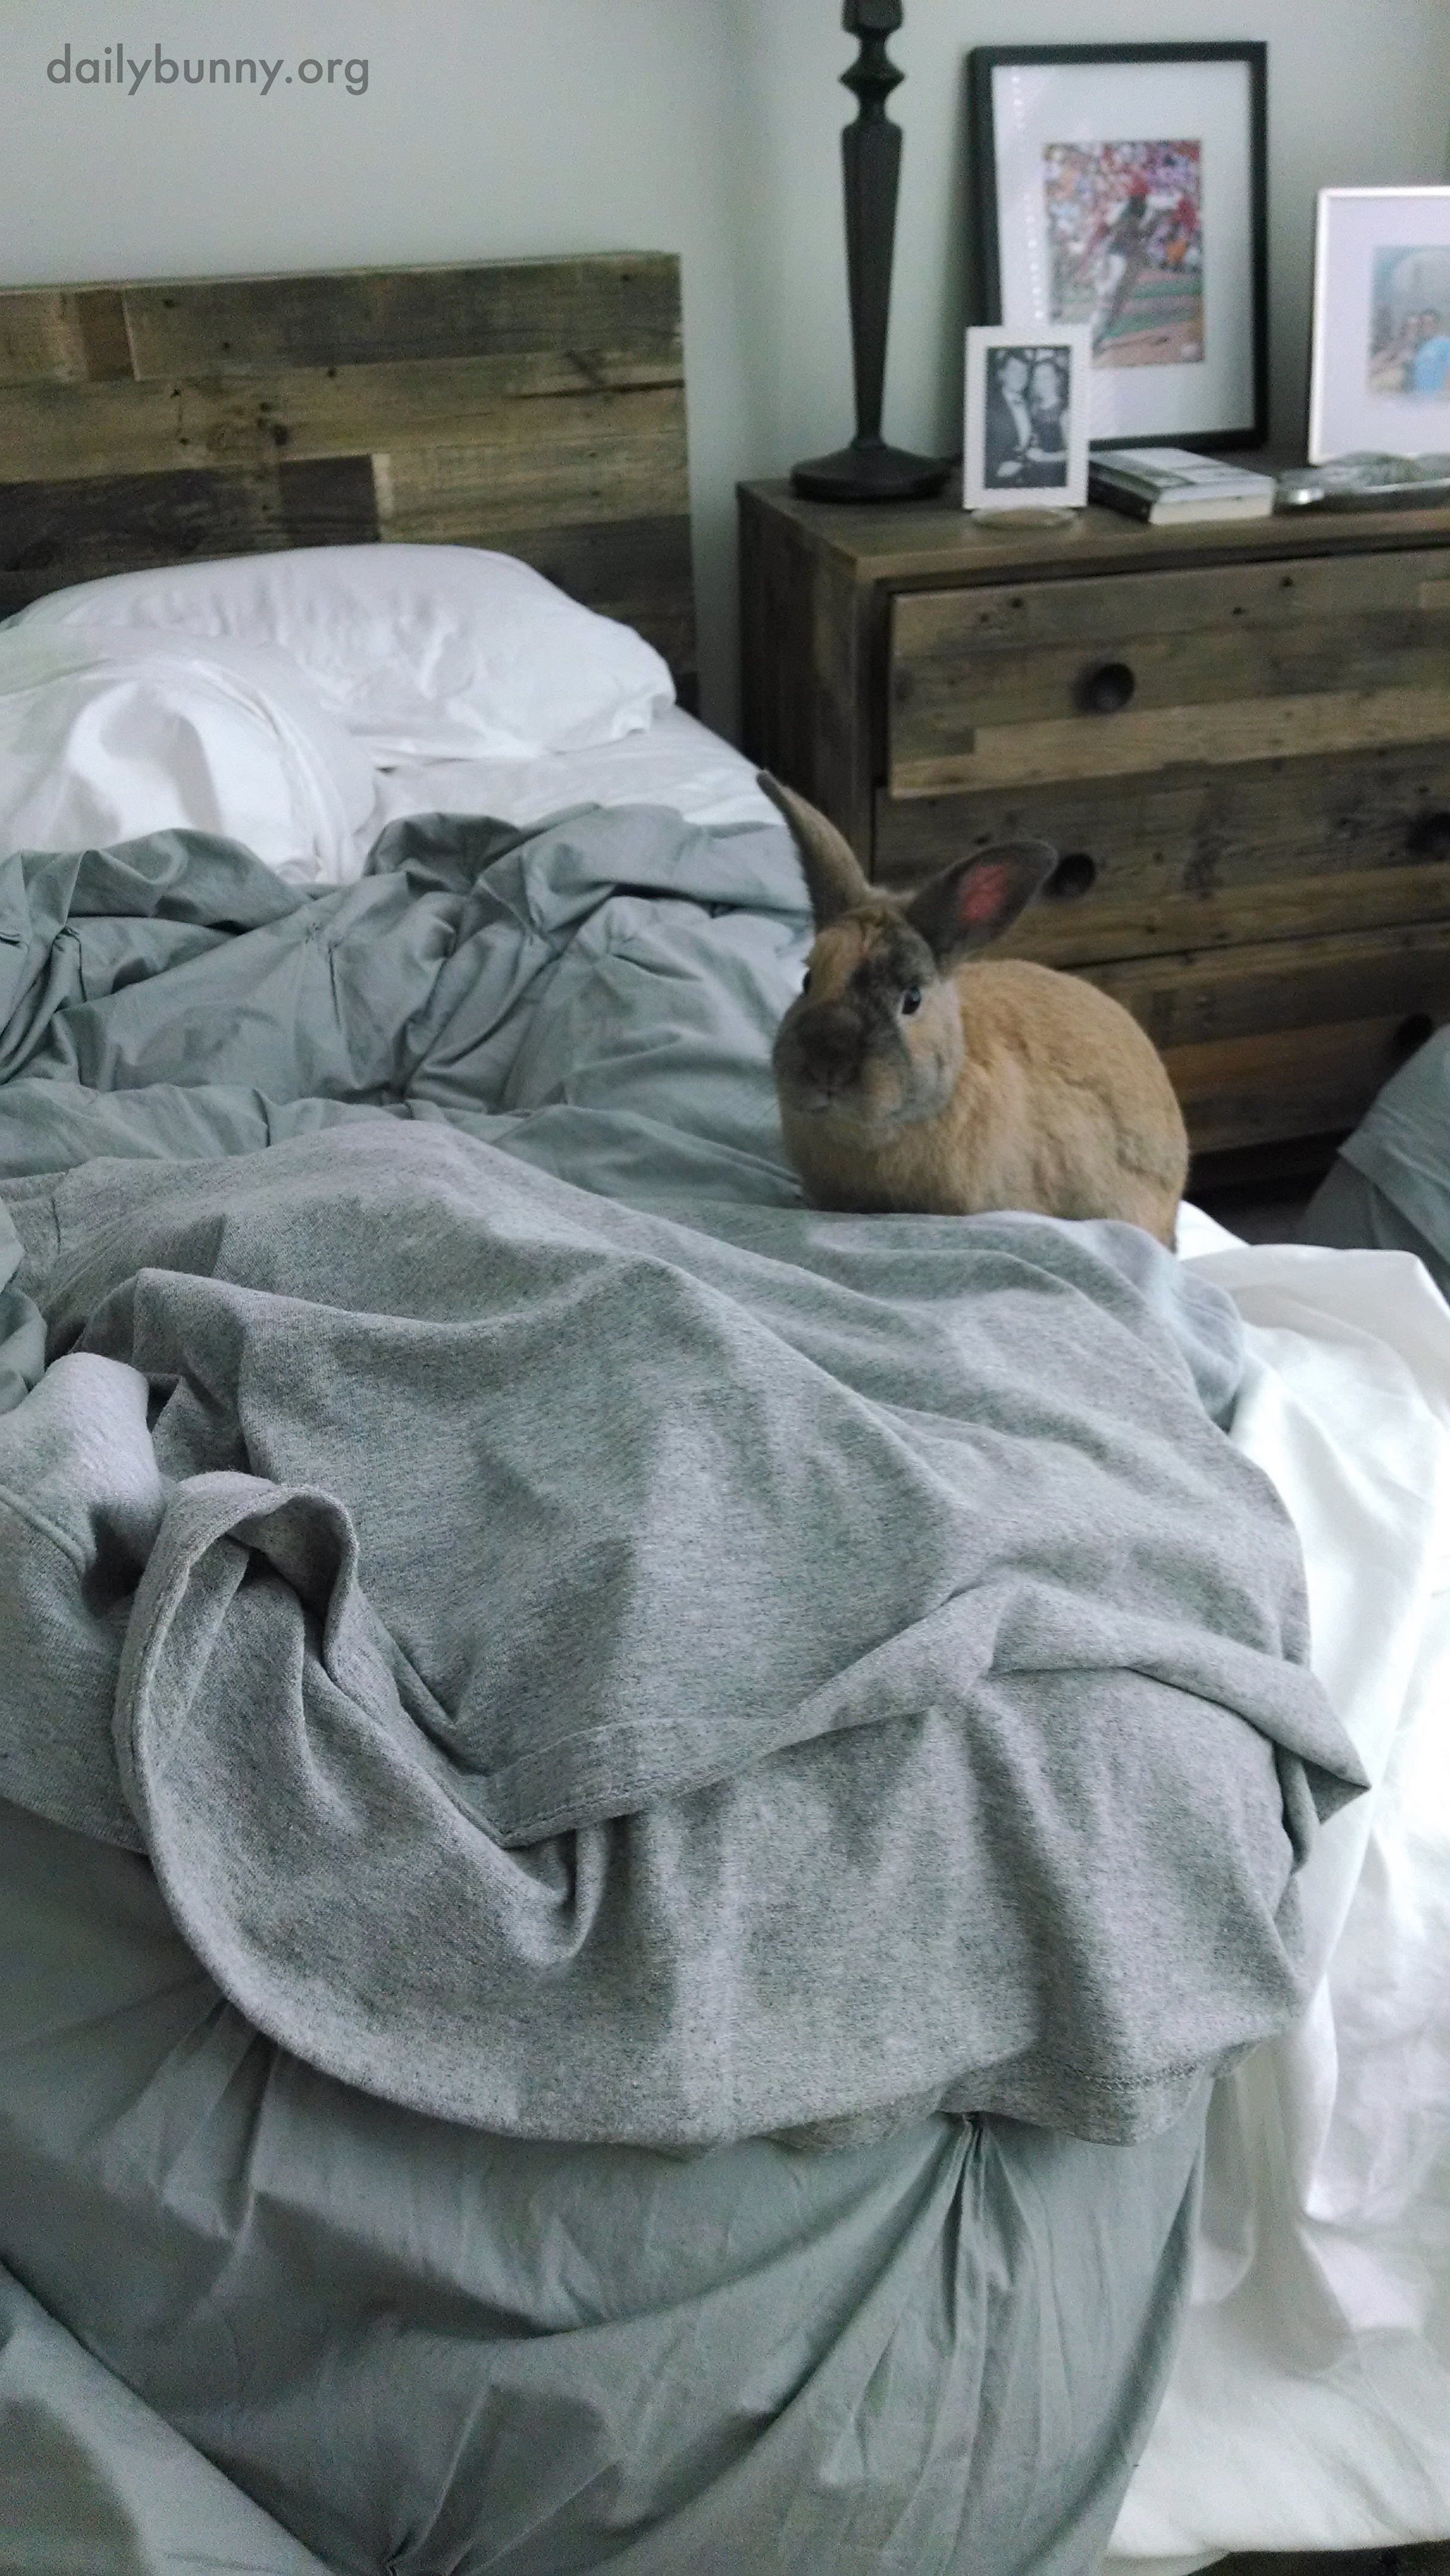 Bunny Is Ready for a Languid Morning Full of Cuddles - So Get Back in the Bed, Human! 1